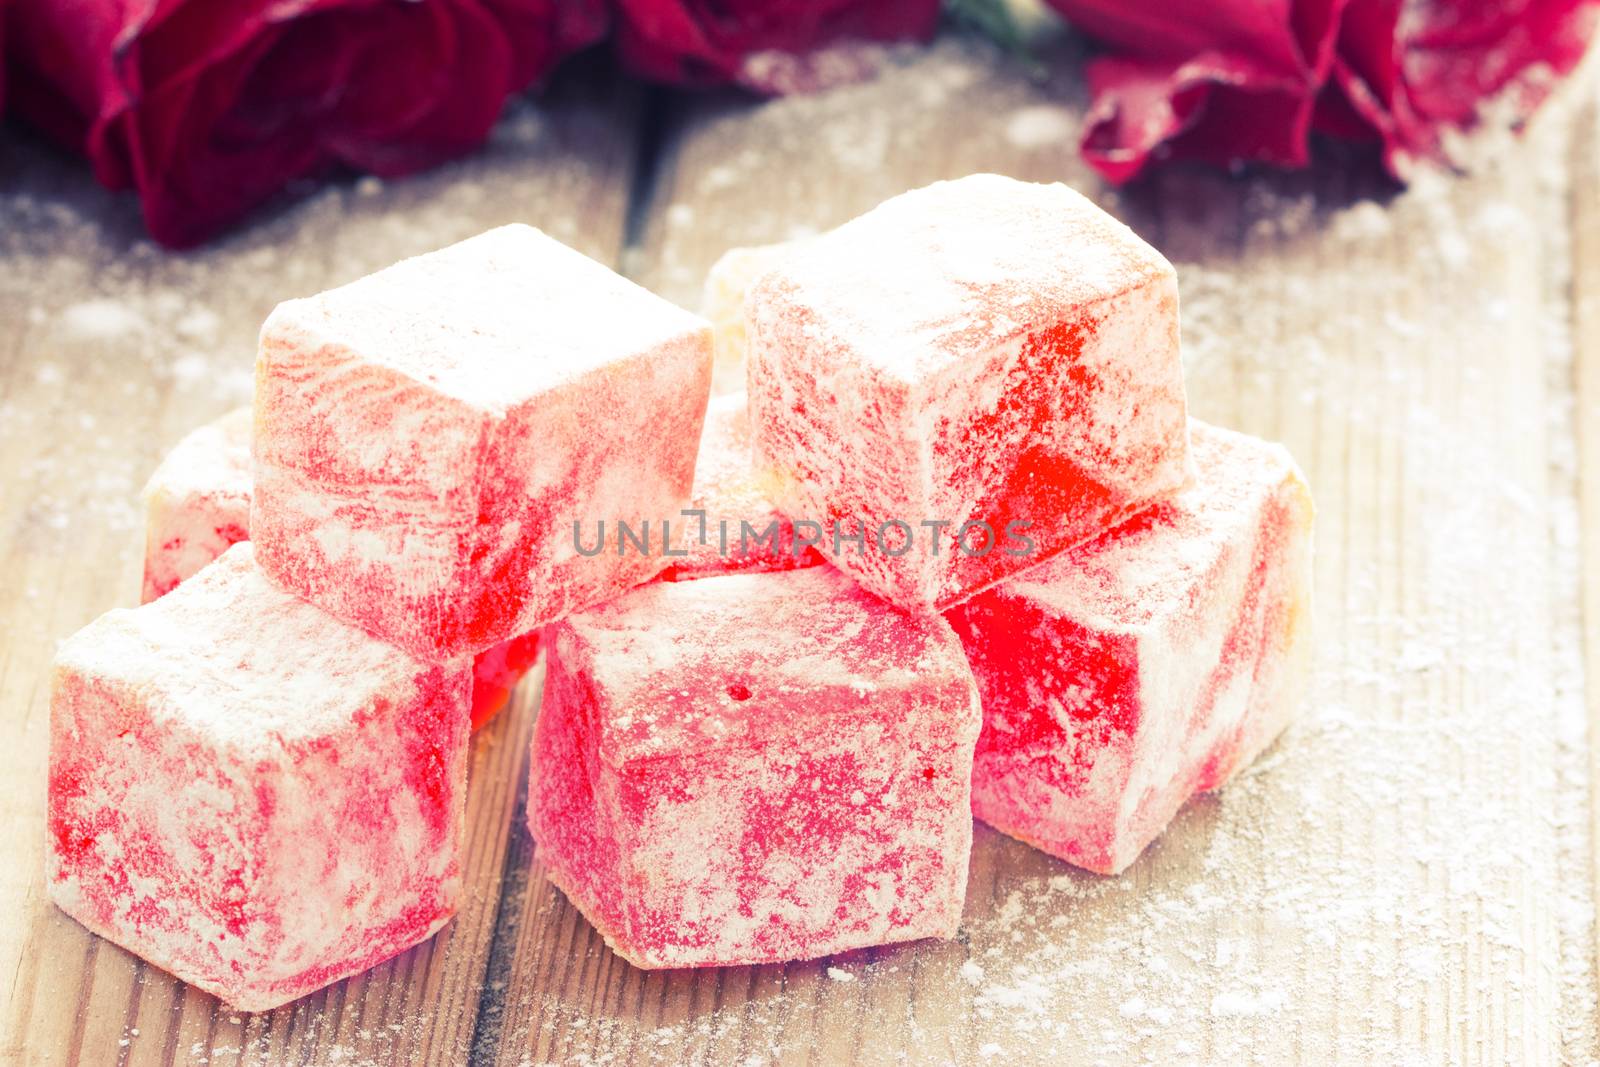 Delicious Turkish Delight with rose flower by liwei12